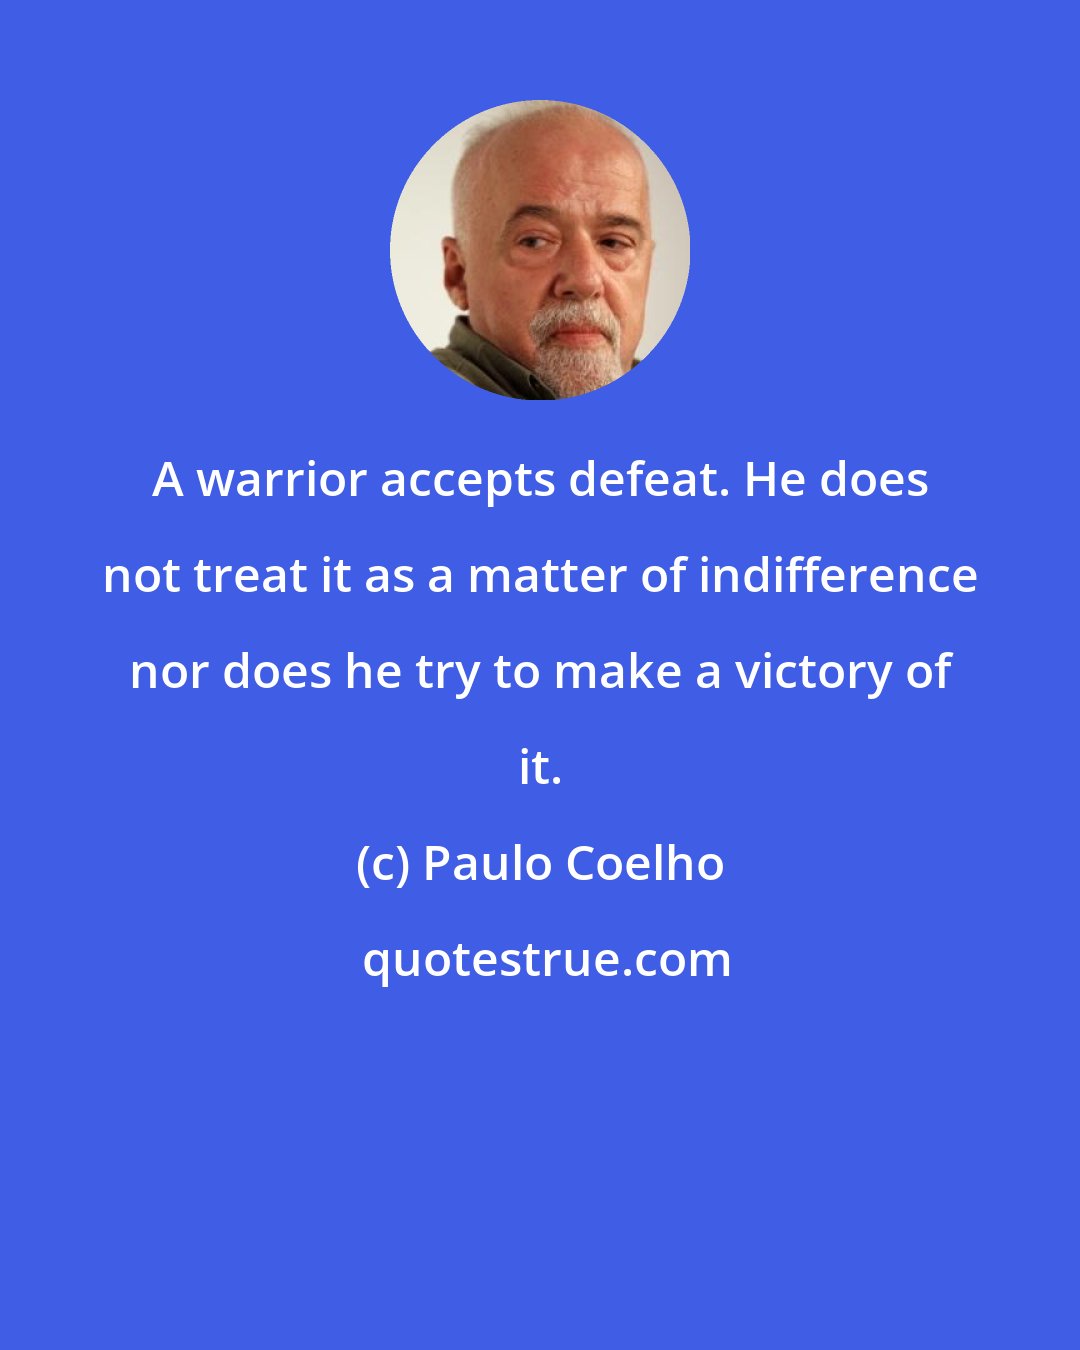 Paulo Coelho: A warrior accepts defeat. He does not treat it as a matter of indifference nor does he try to make a victory of it.